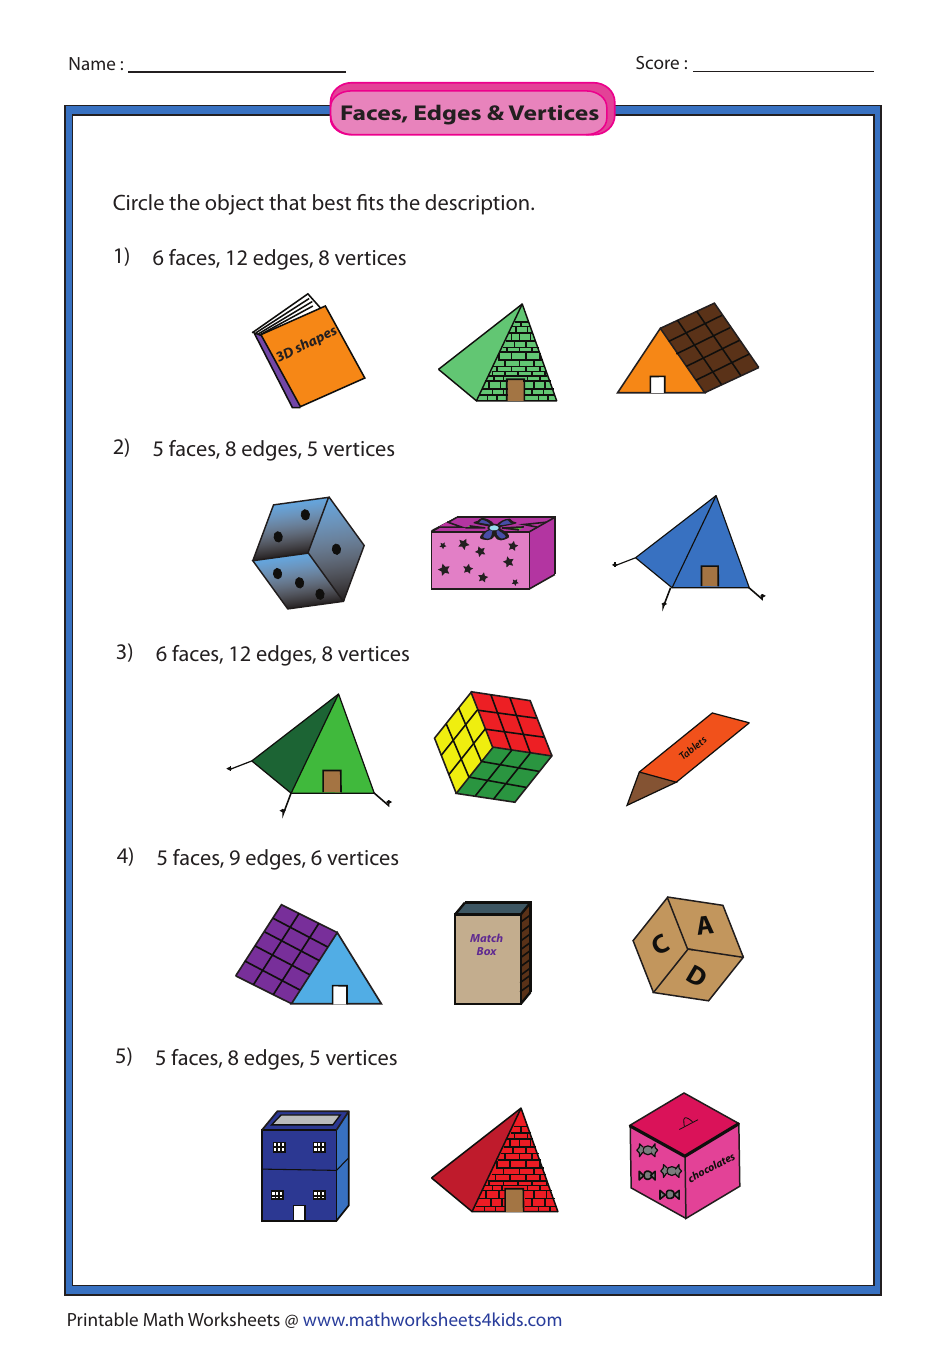 Faces, Edges & Vertices Worksheet With Answer Key - Book Image Preview